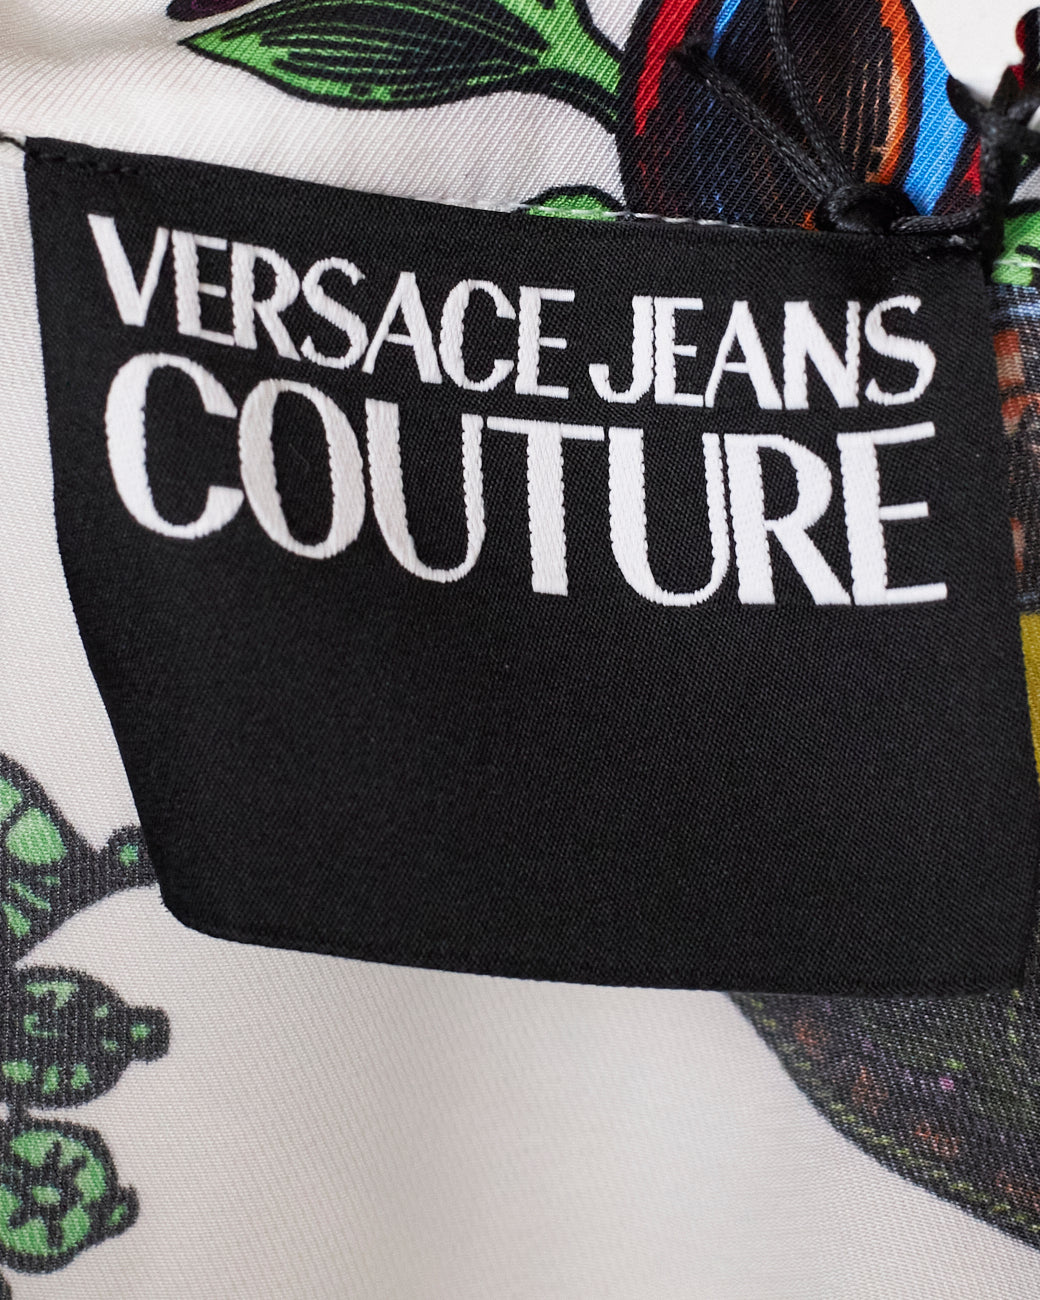 Versace Jeans Couture Printed Shirt